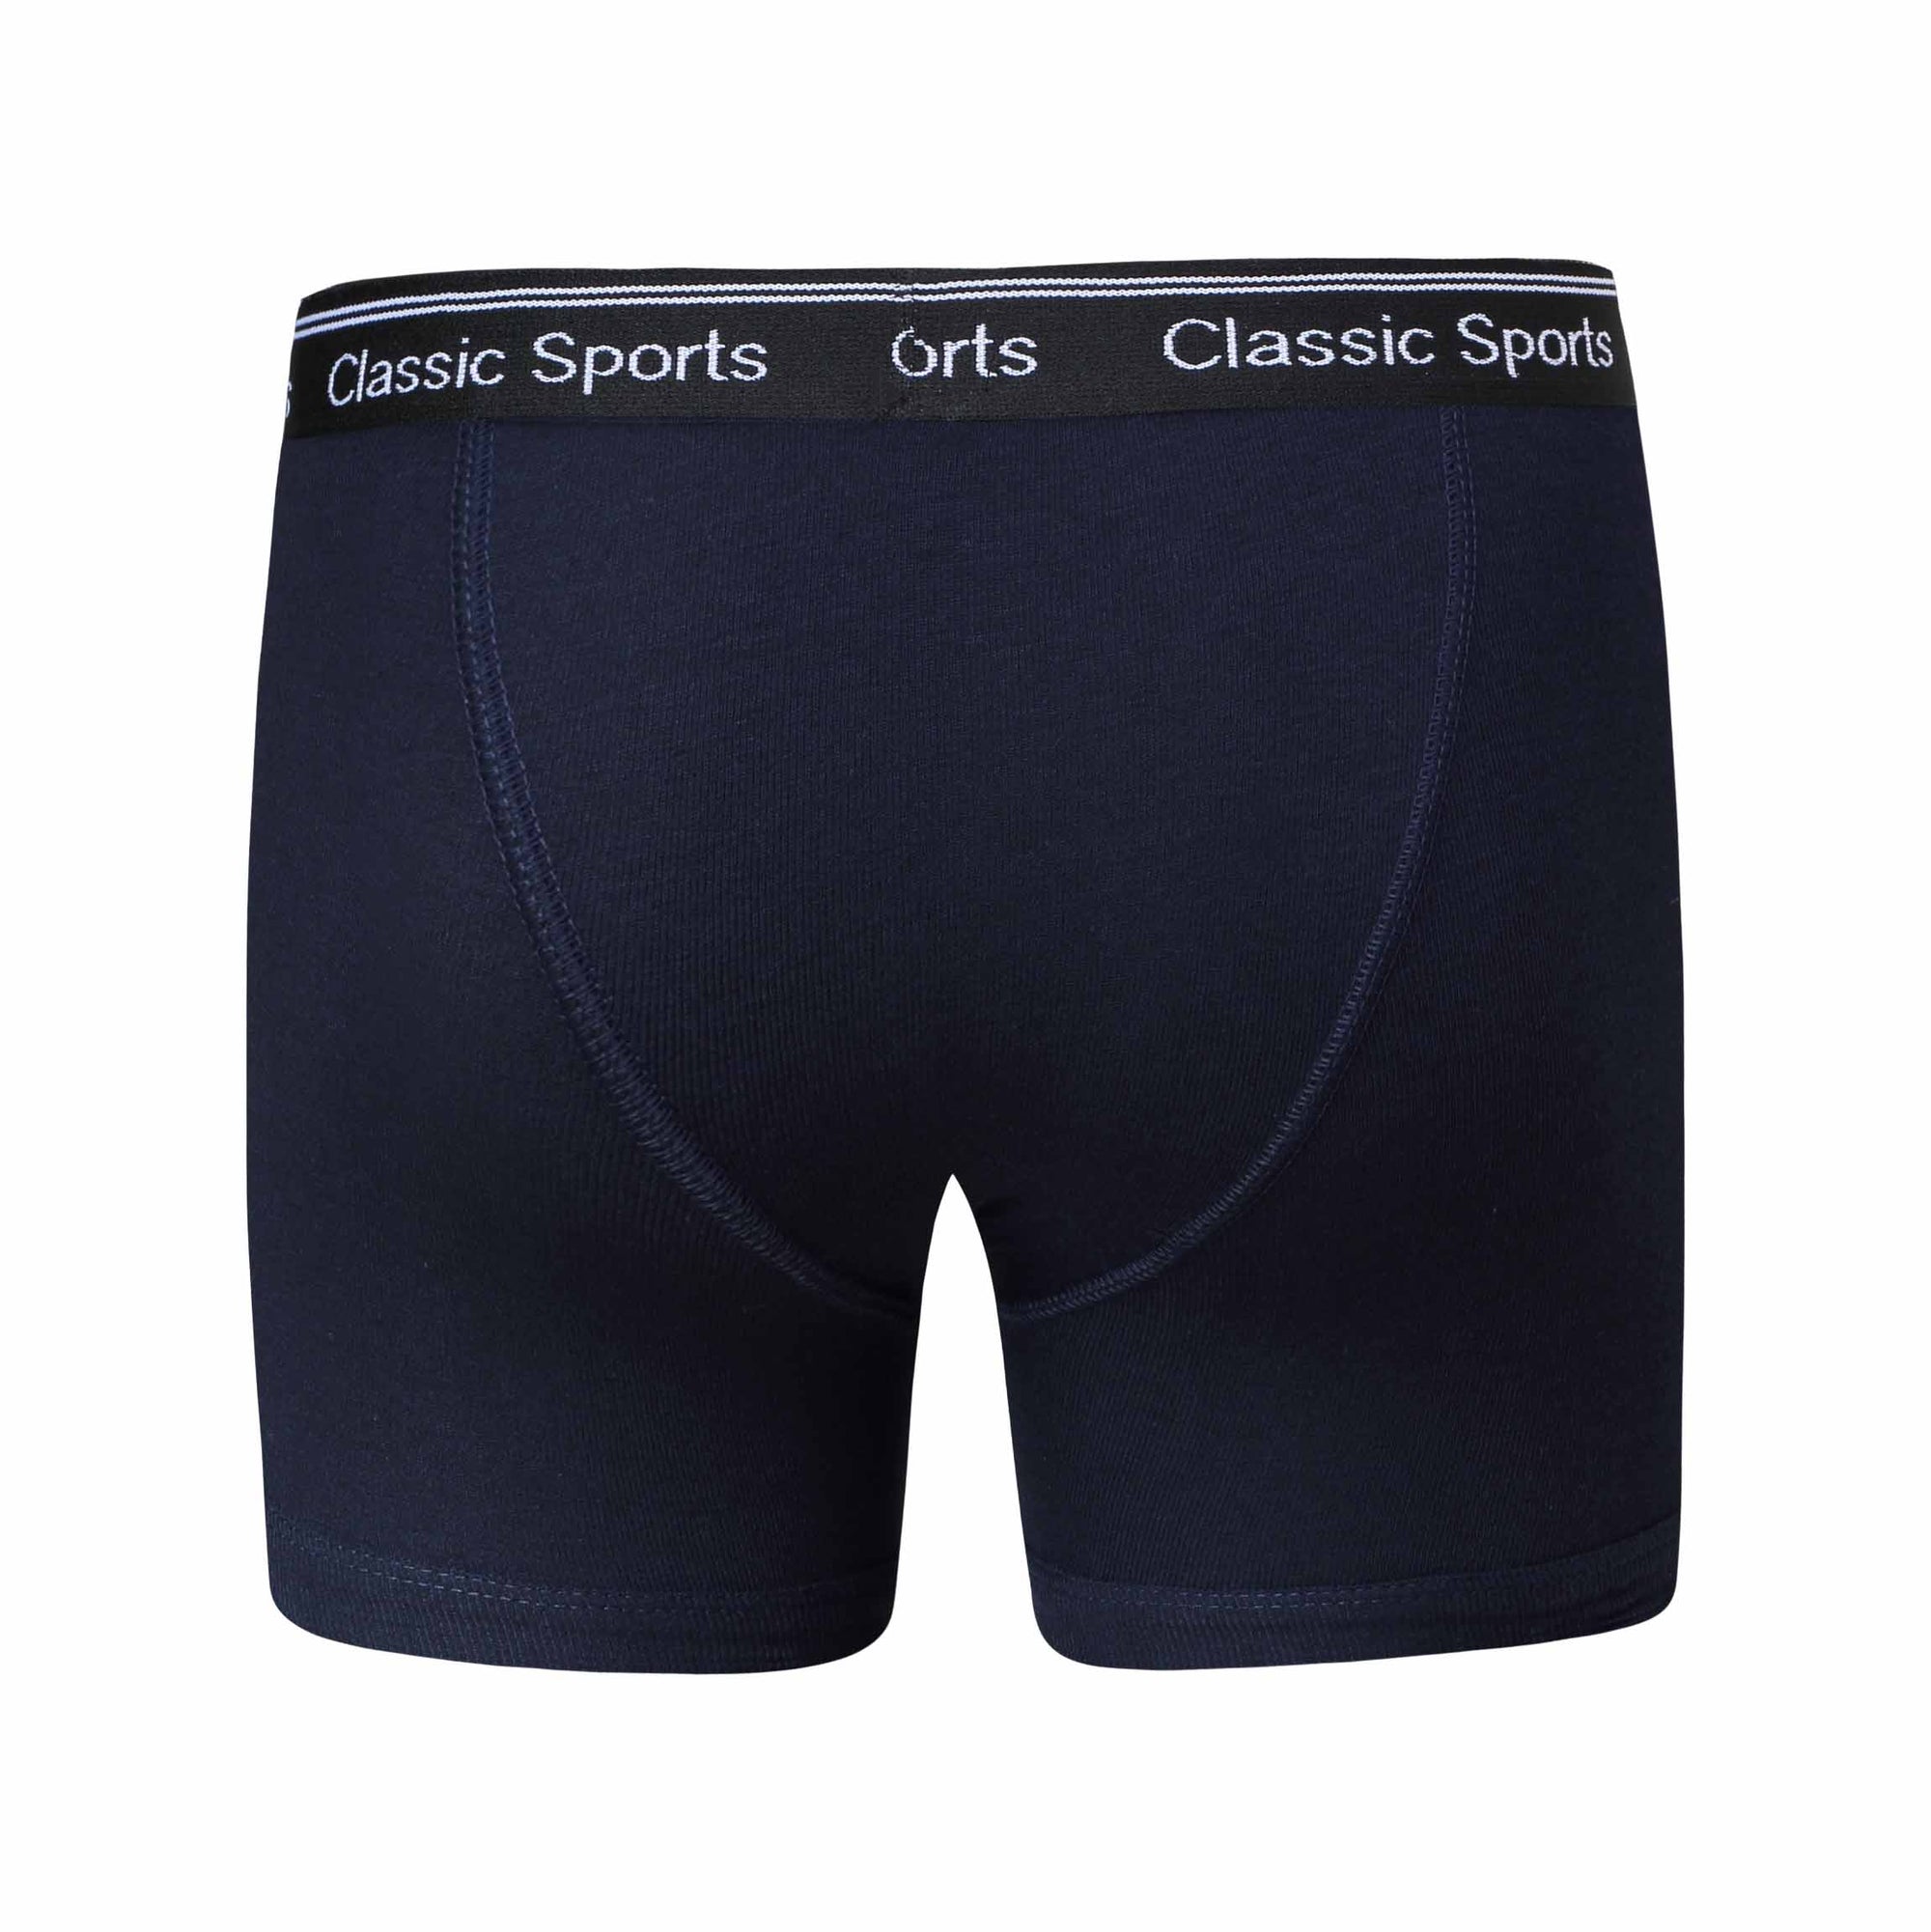 3 PACK MENS CLASSIC SPORTS MATCH BOXER SHORTS - The Egyptian Cotton